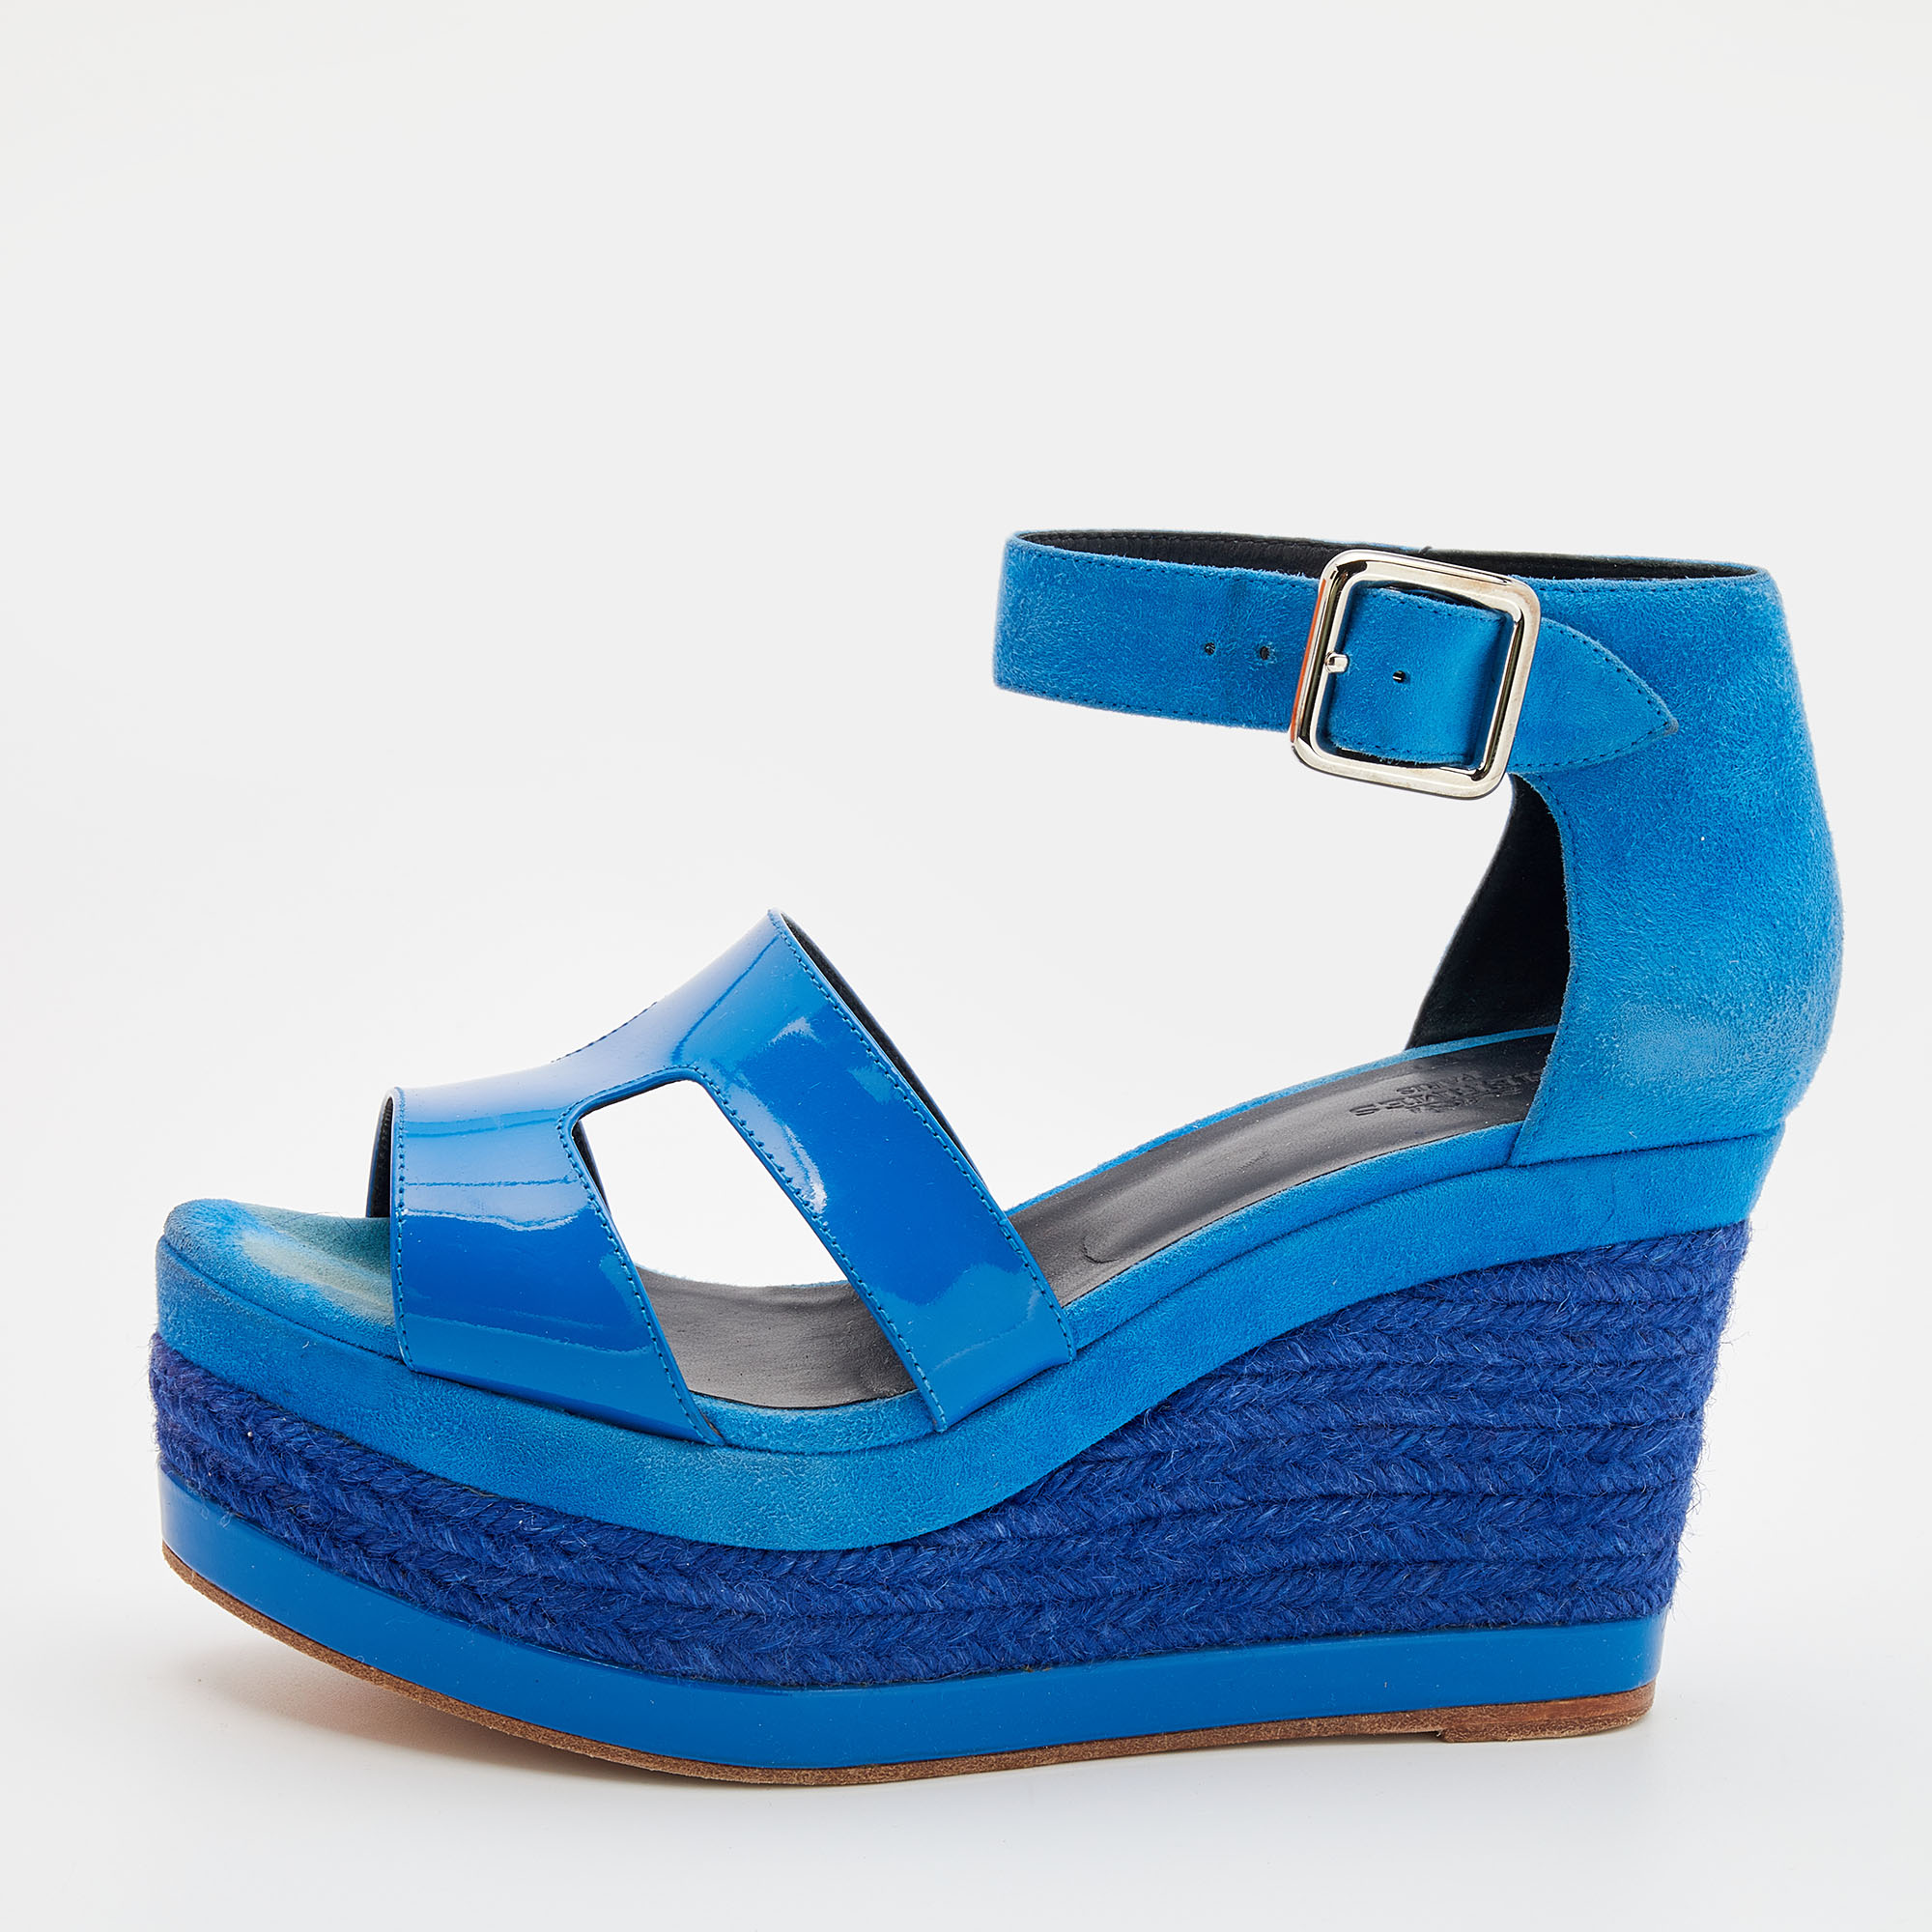 Hermes Blue Patent Leather and Suede Ilana Espadrille Wedge Sandals Size 36